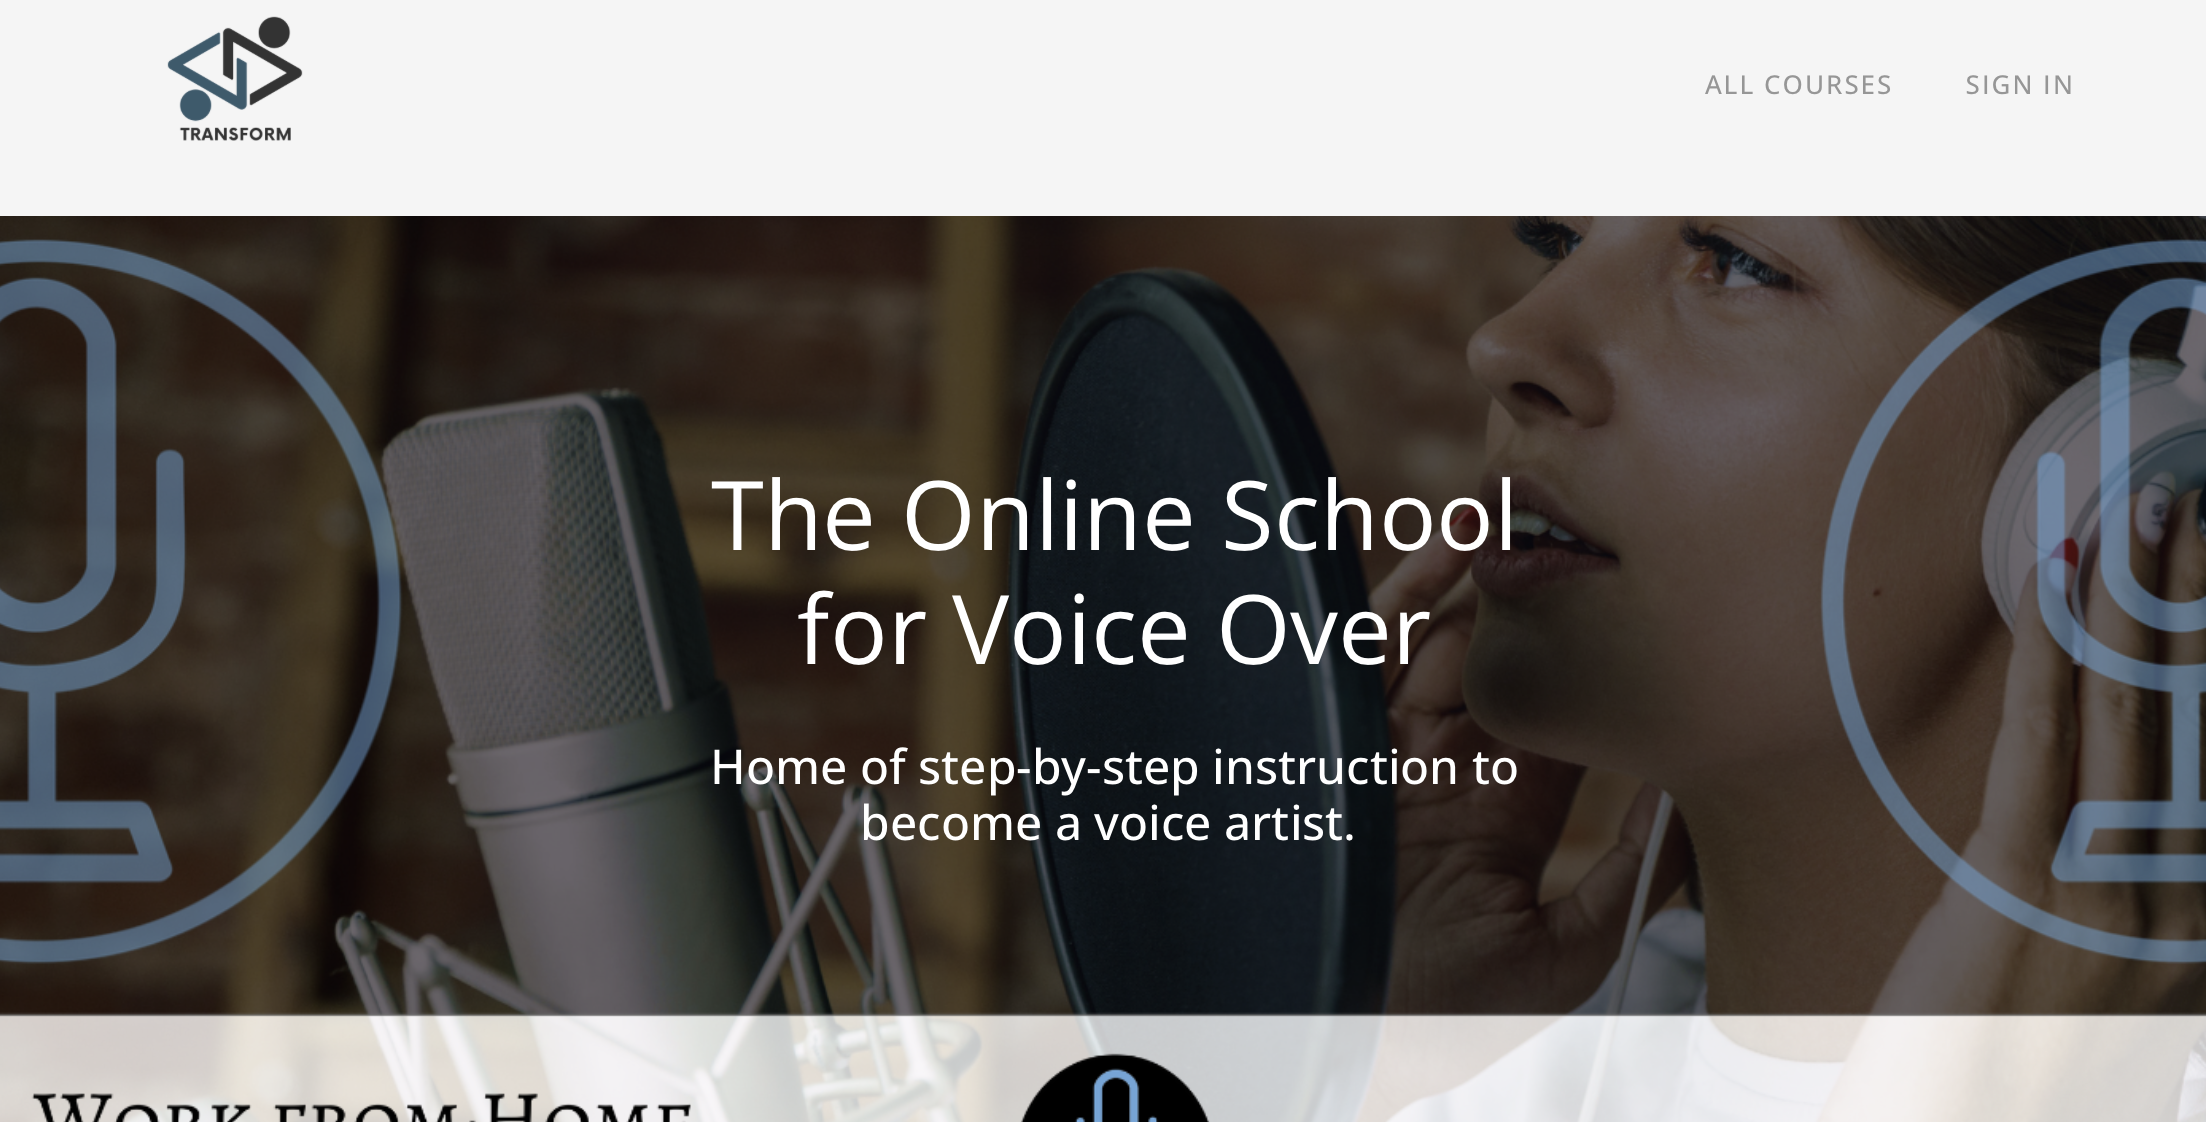 The Online School for Voice Over